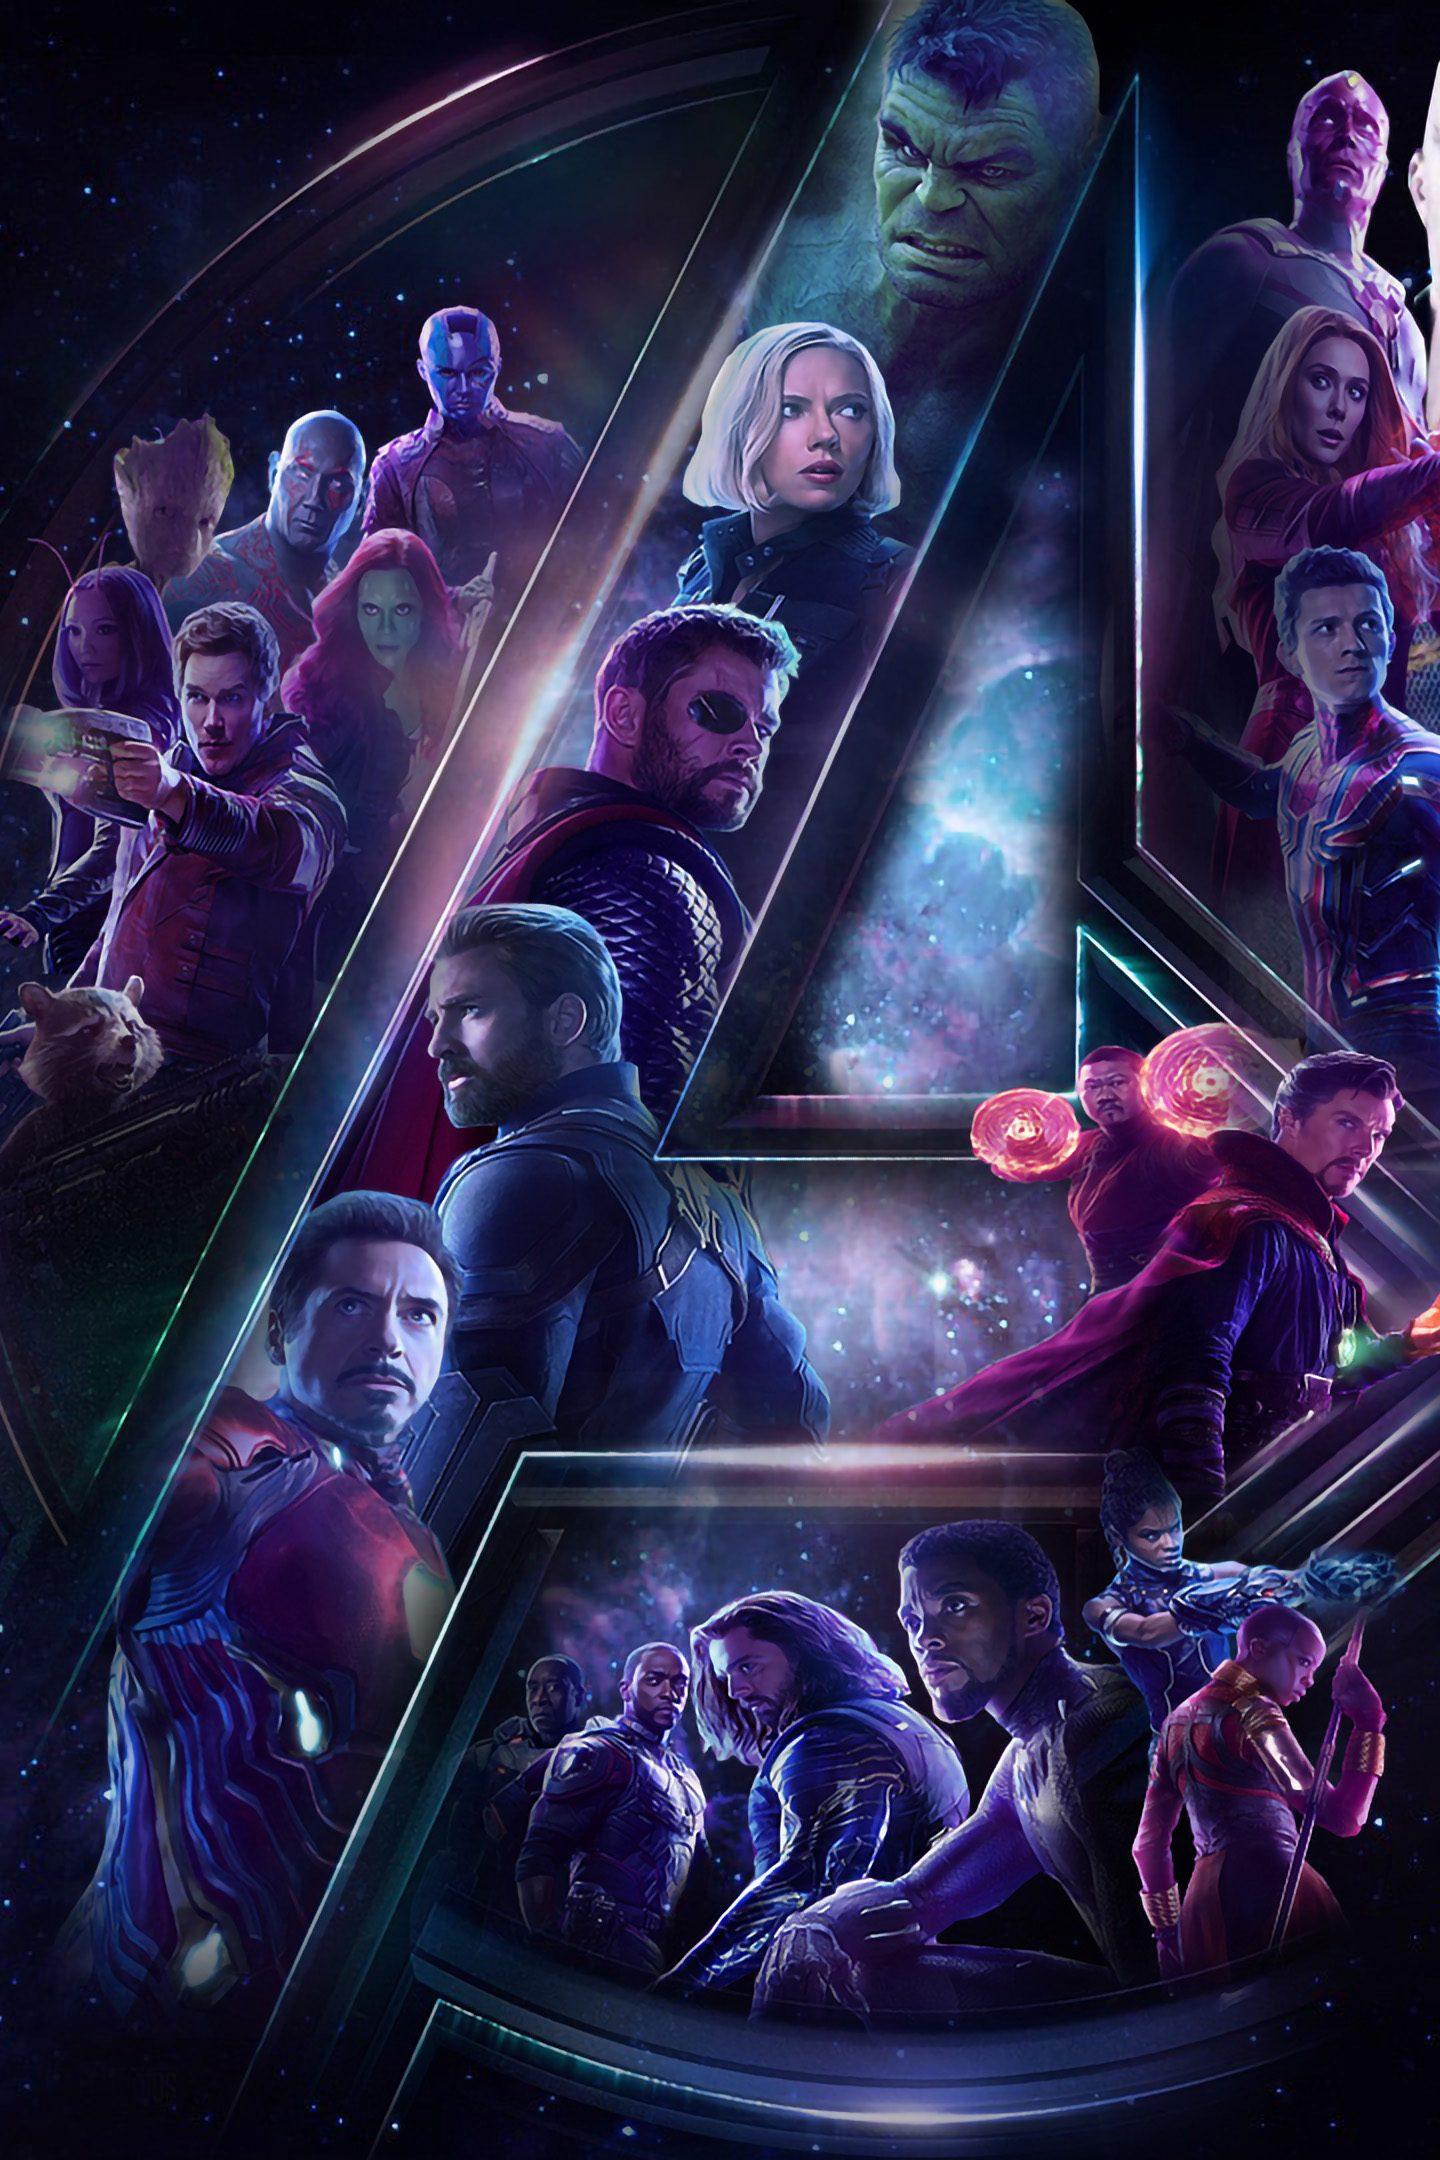 Marvels Avengers phone wallpaper 1080P 2k 4k Full HD Wallpapers  Backgrounds Free Download  Wallpaper Crafter